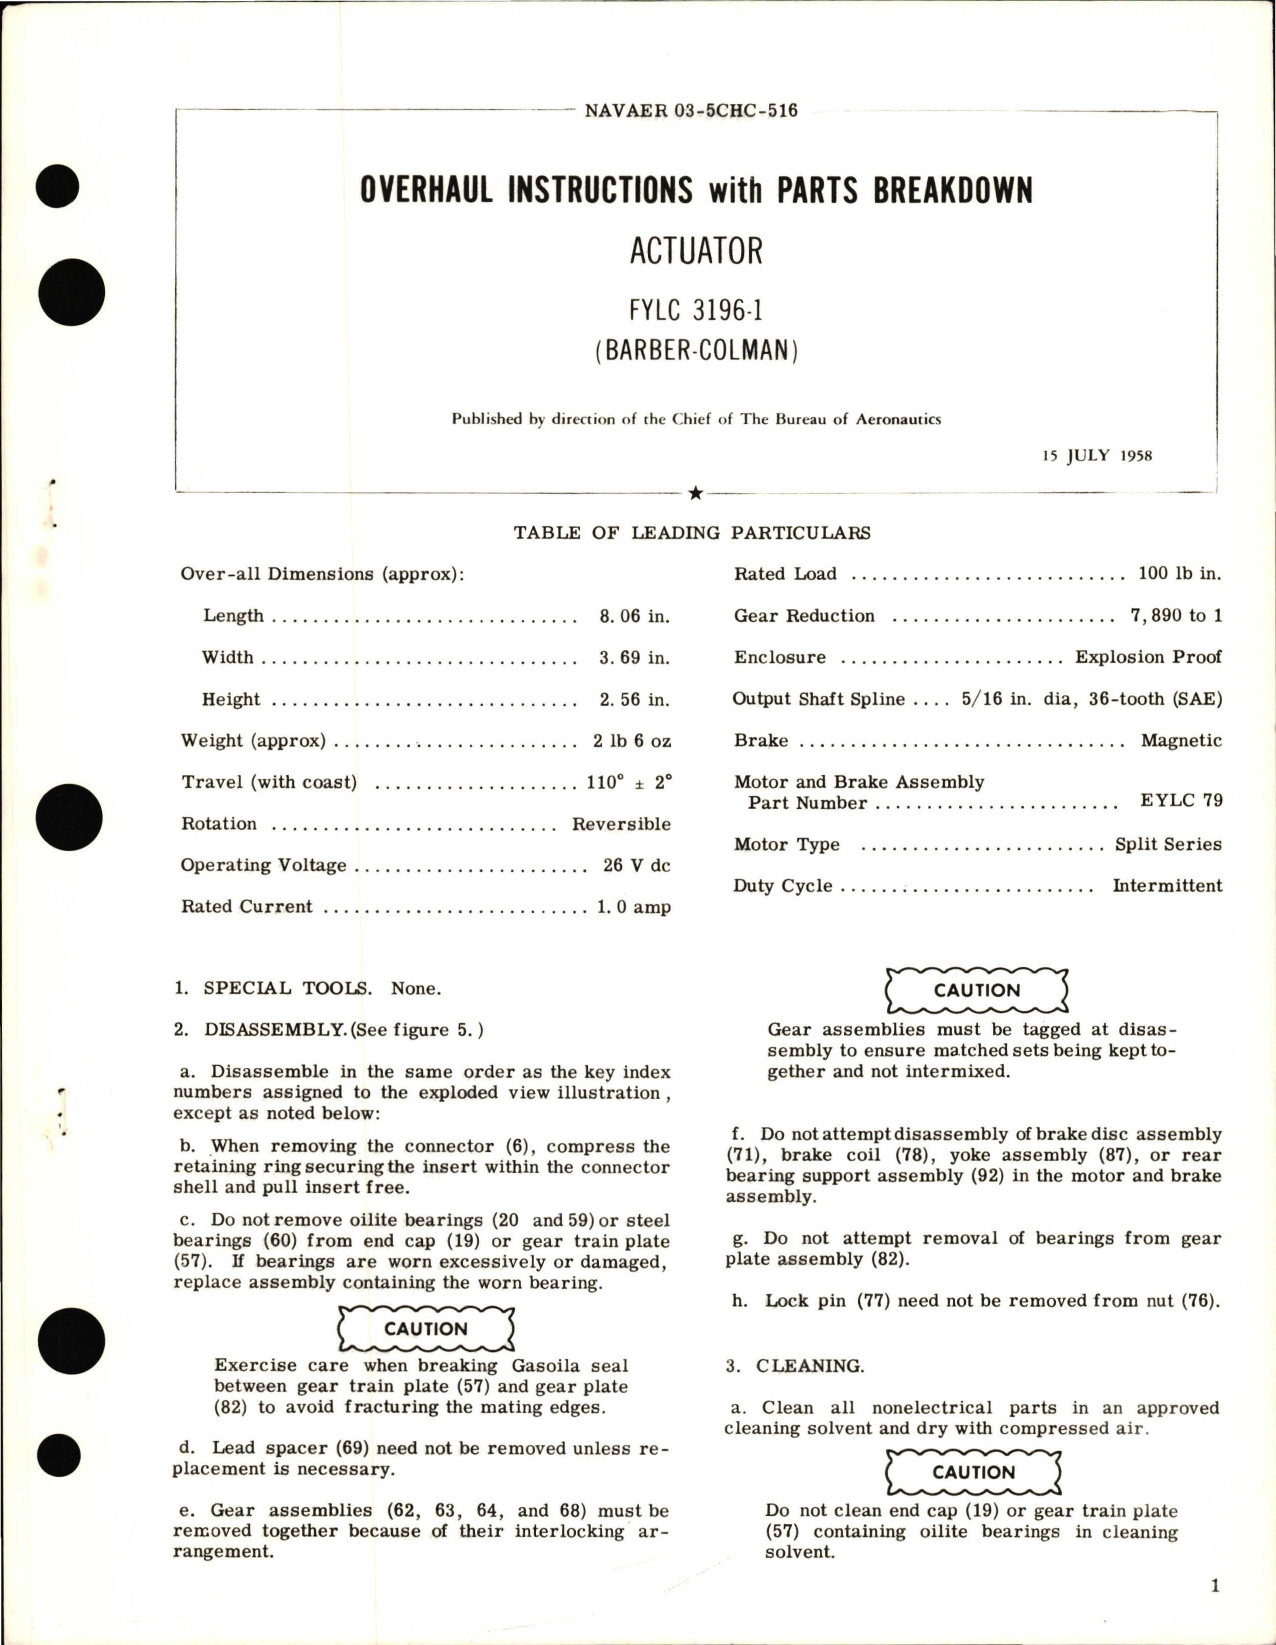 Sample page 1 from AirCorps Library document: Overhaul Instructions with Parts Breakdown for Actuator - FYLC 3196-1